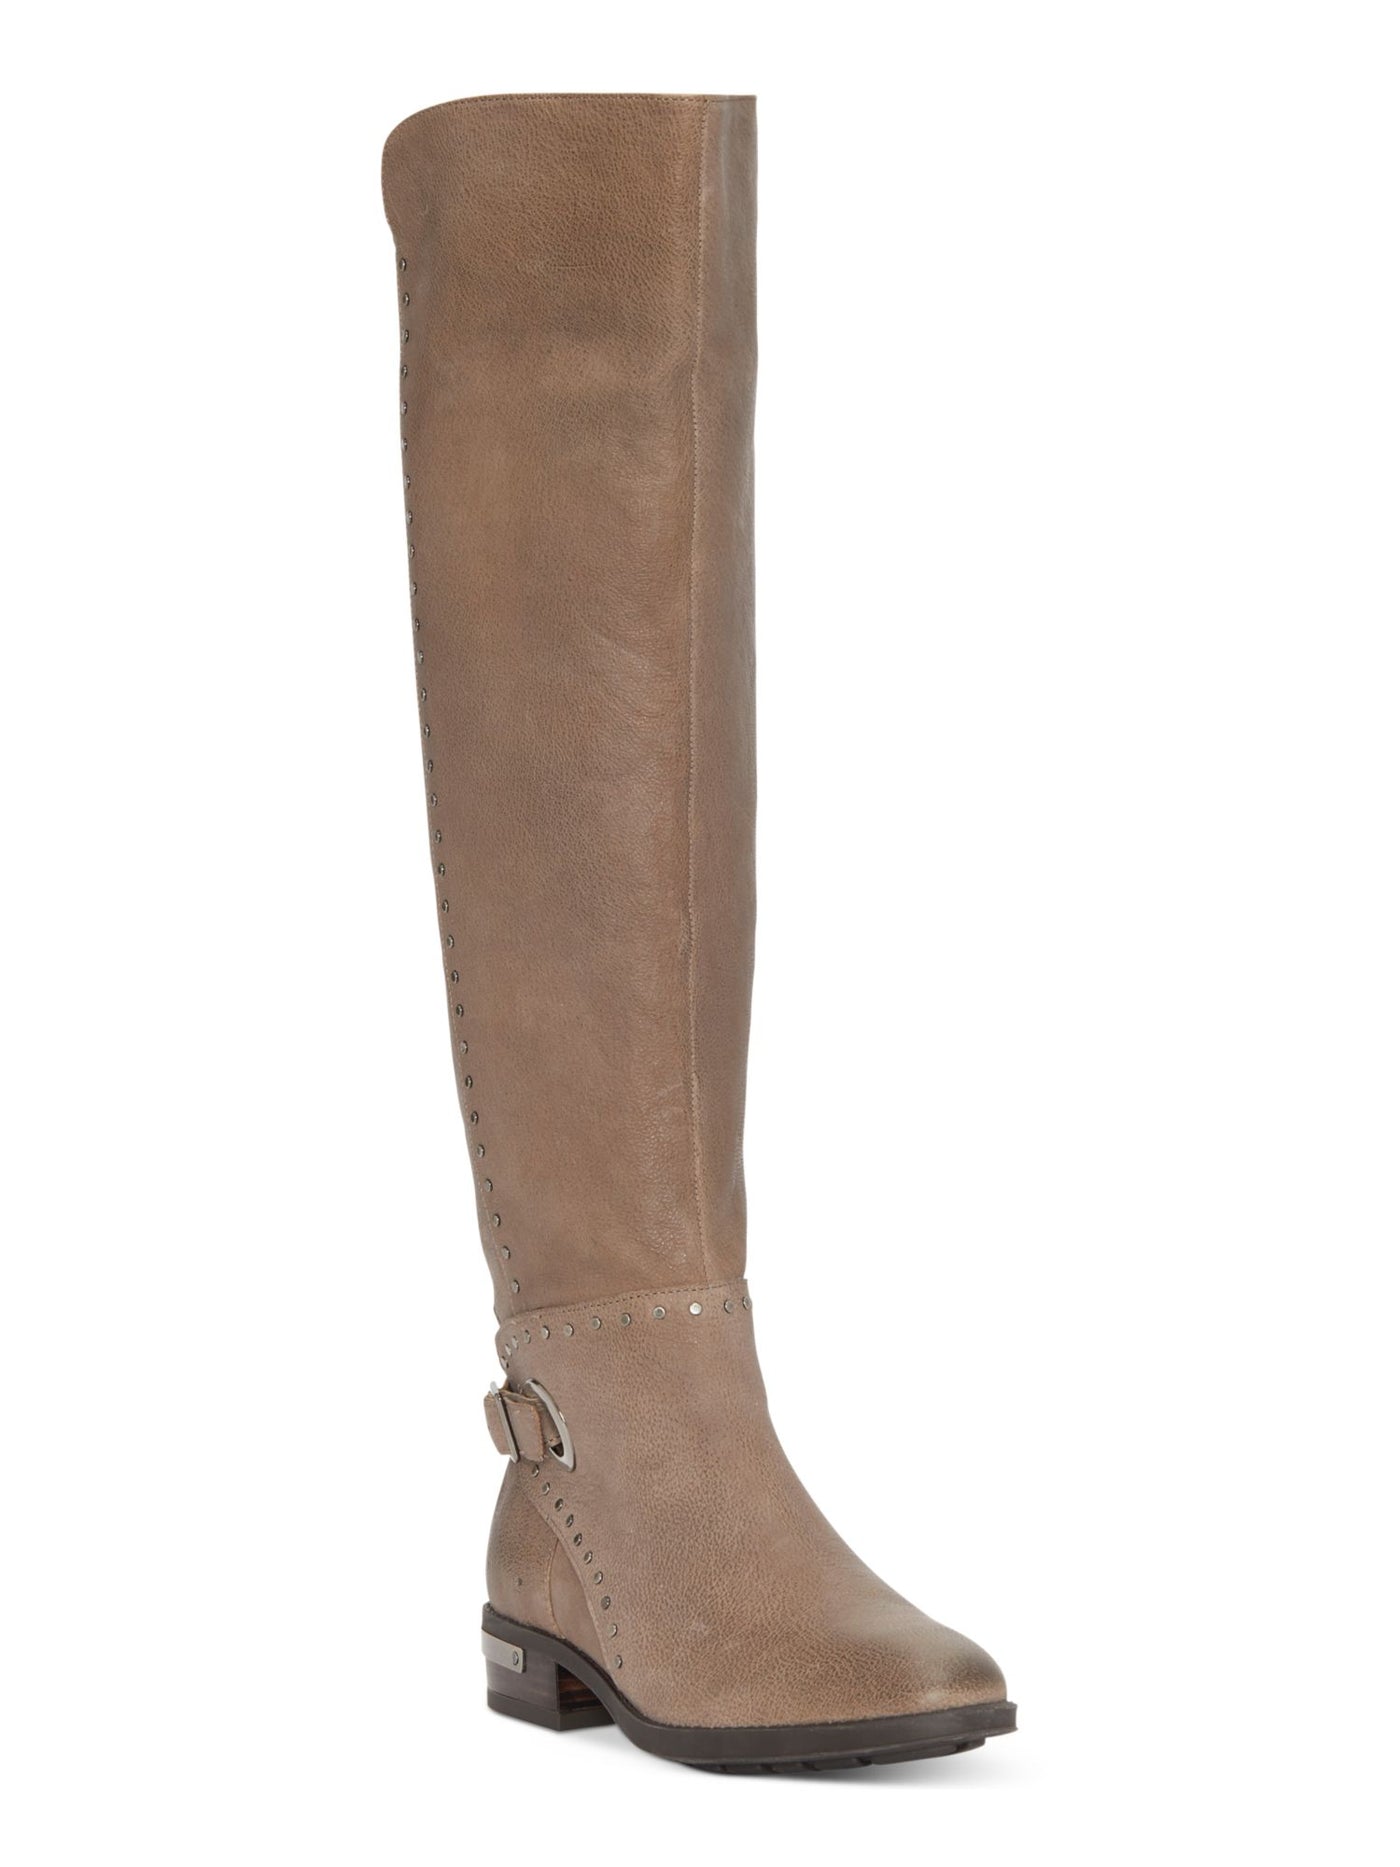 VINCE CAMUTO Womens Beige Heel Accent Cushioned Studded Round Toe Stacked Heel Zip-Up Leather Riding Boot 5